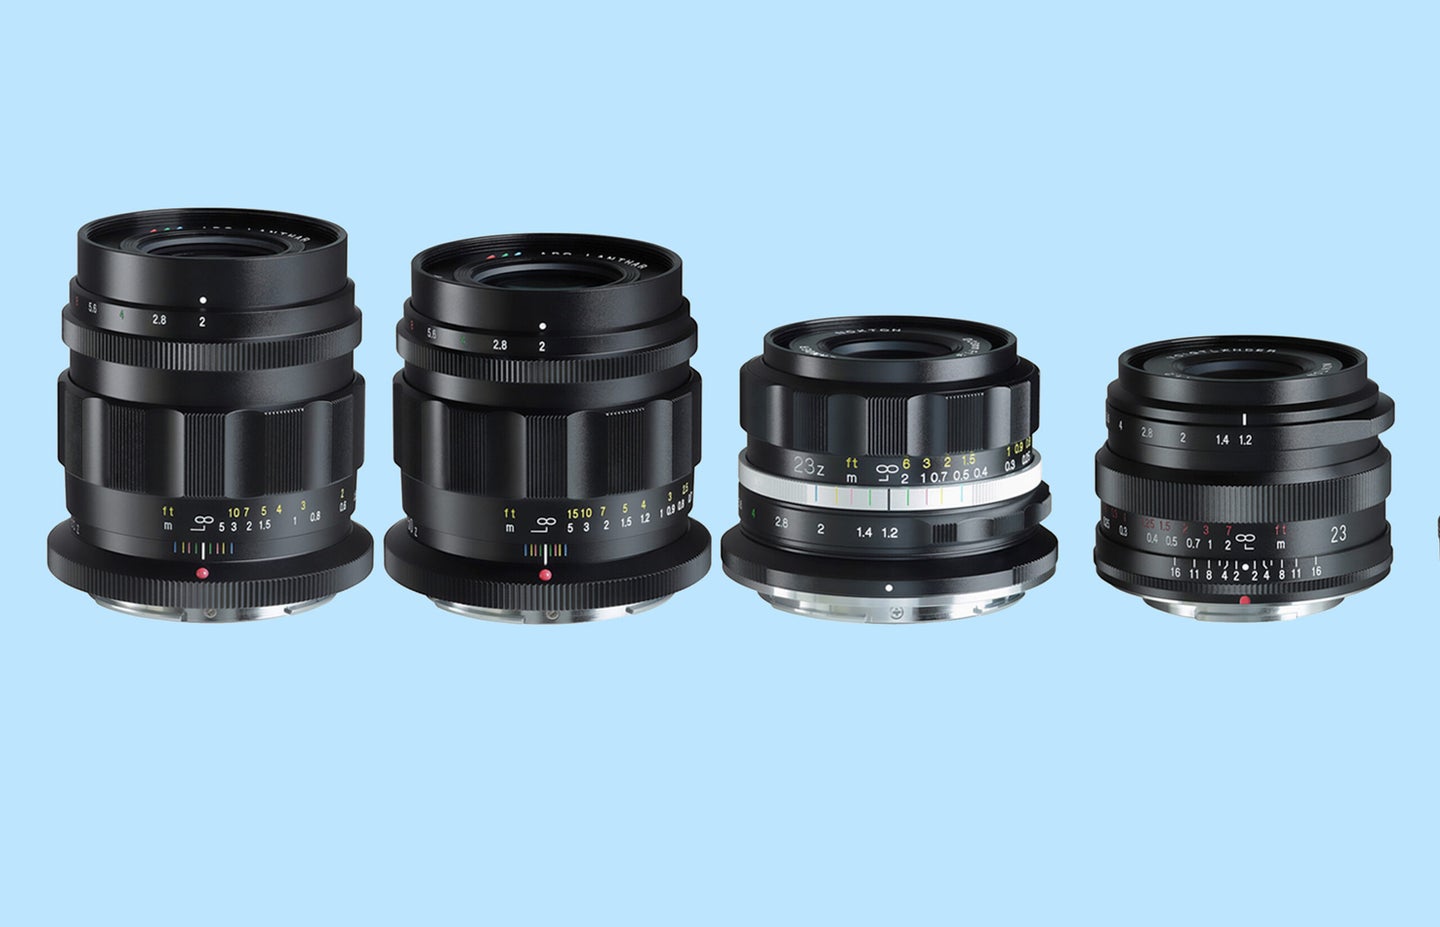 Cosina has four new primes, 3 for Z-mount, 1 for X-mount.